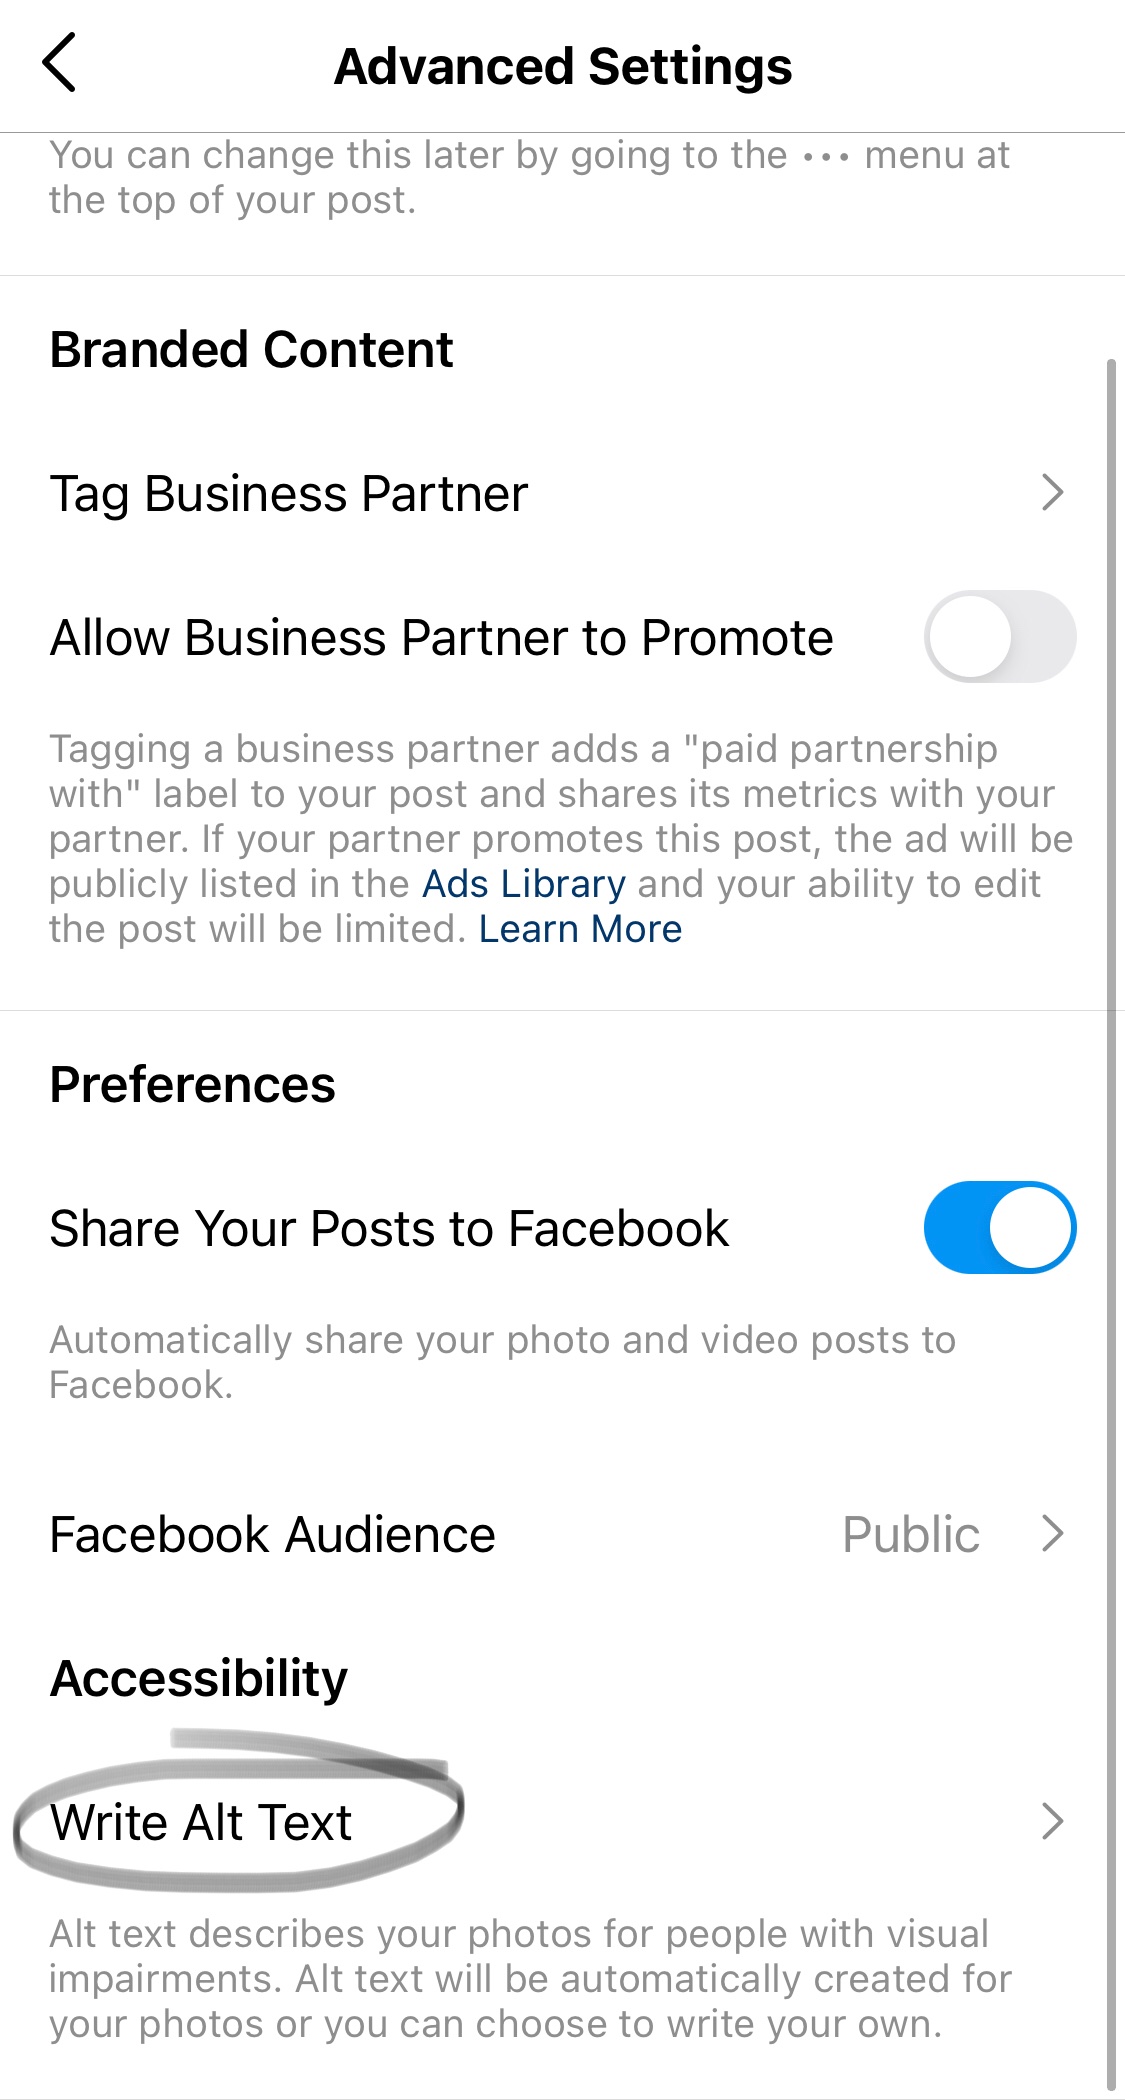 Instagram advanced settings menu indicating how to access the alt text function.